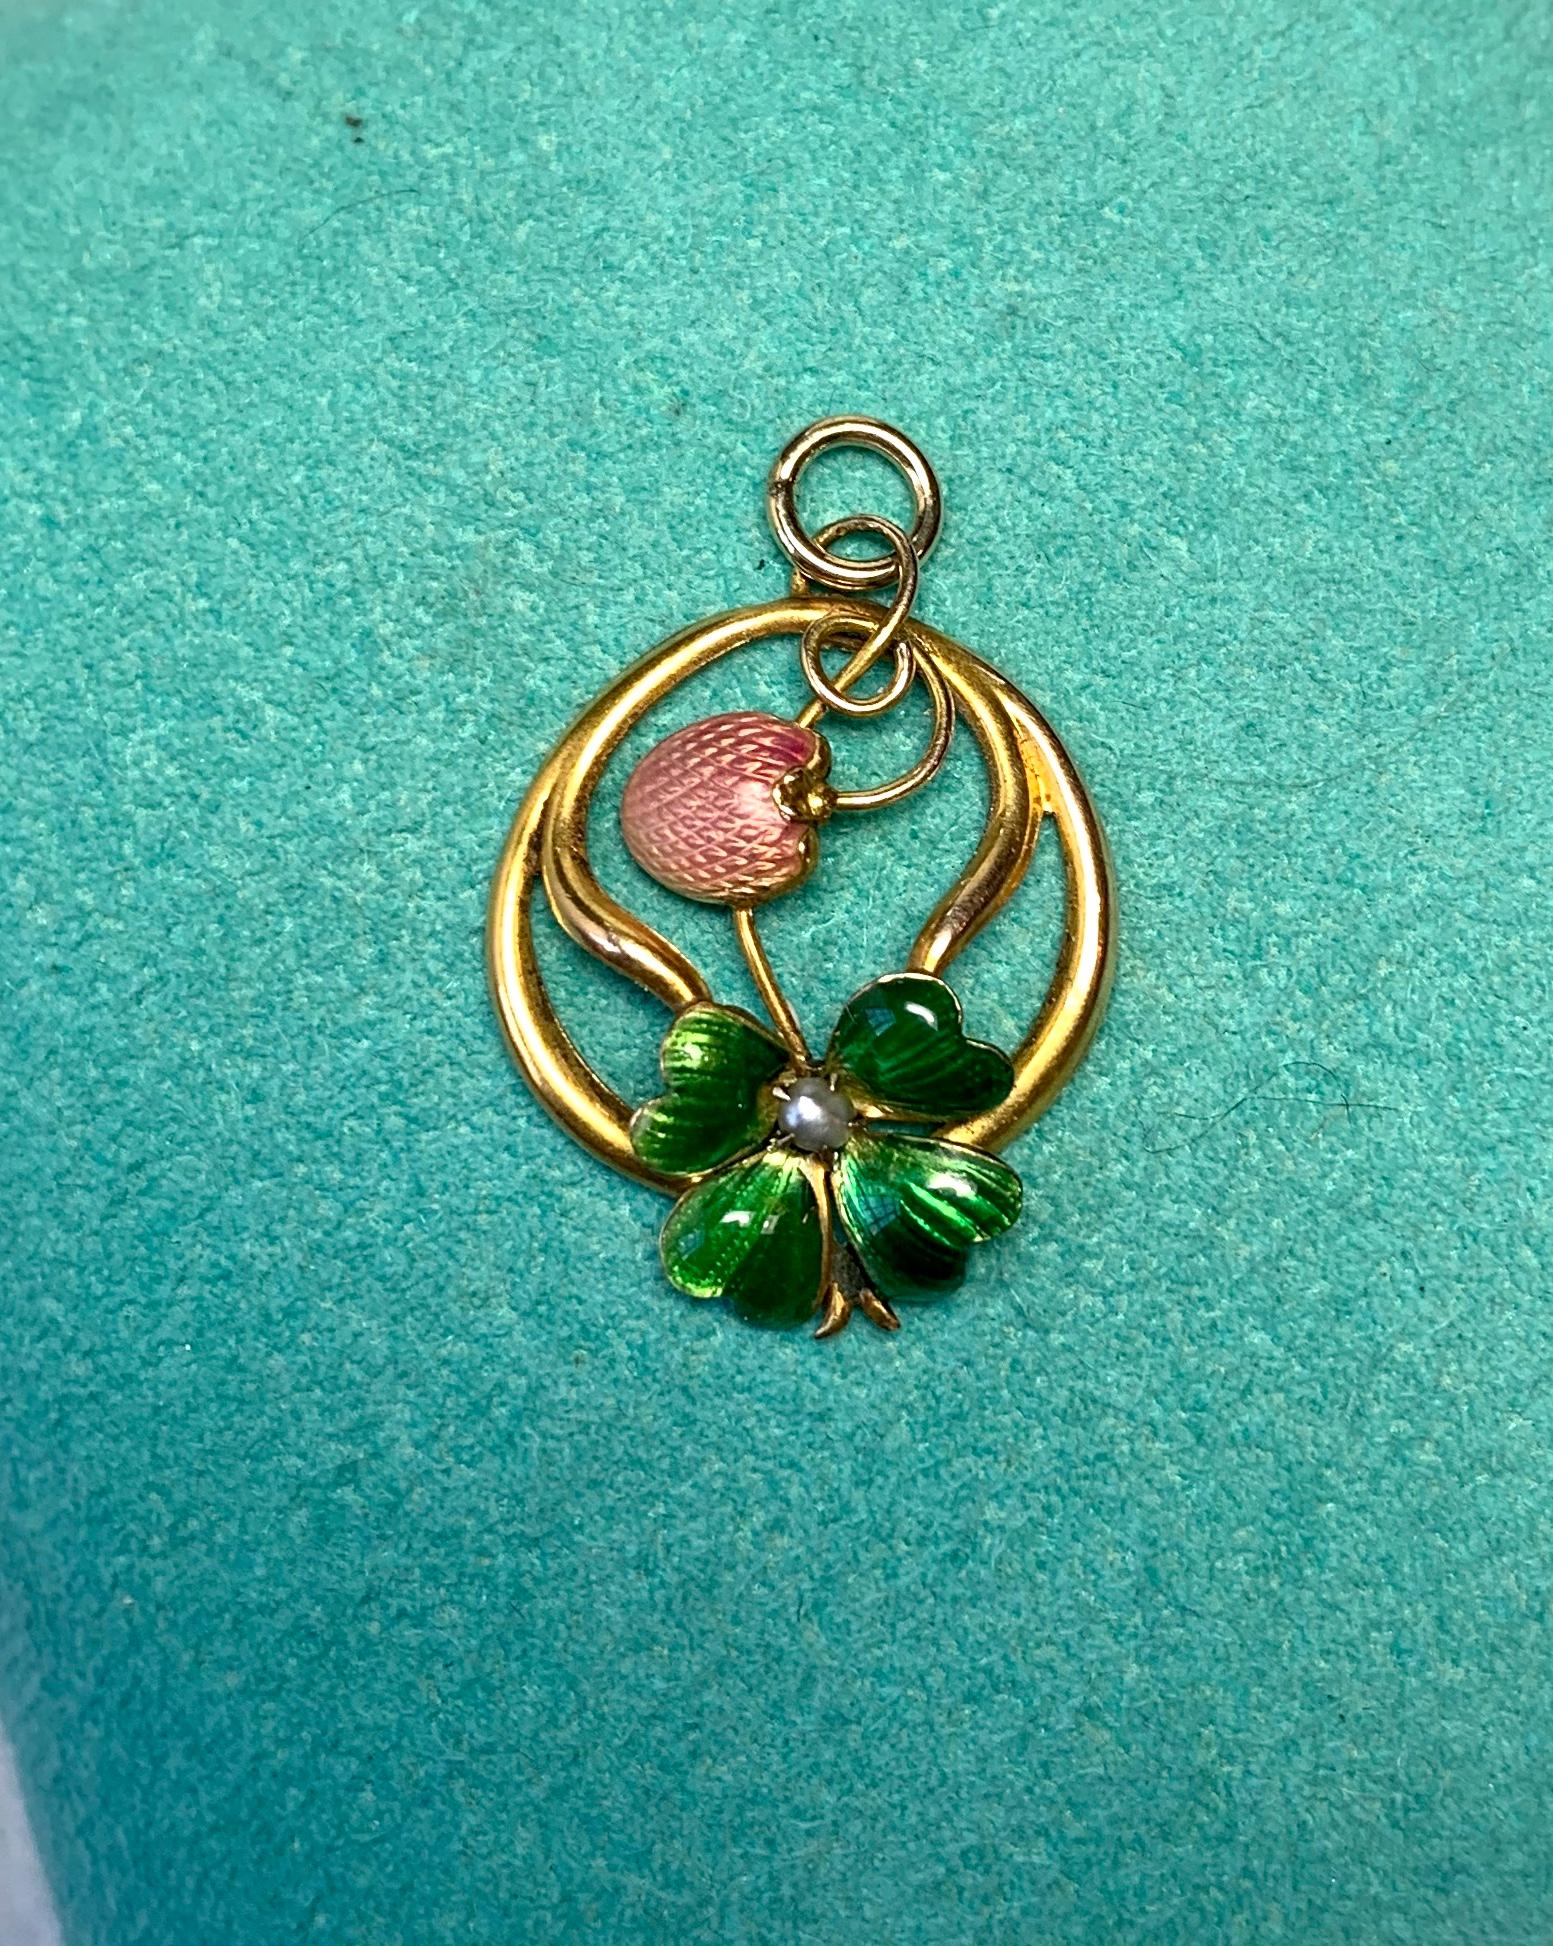 A VICTORIAN - ART NOUVEAU PENDANT IN THE FORM OF AN ENTWINED STRAWBERRY AND A LUCKY FOUR LEAF CLOVER WITH A CENTRAL PEARL AND THE MOST SPECTACULAR GREEN AND RED DETAILED ENAMEL OF THE HIGHEST QUALITY.  WITH BEAUTIFUL GOLD WORK IN 10 KARAT GOLD AND